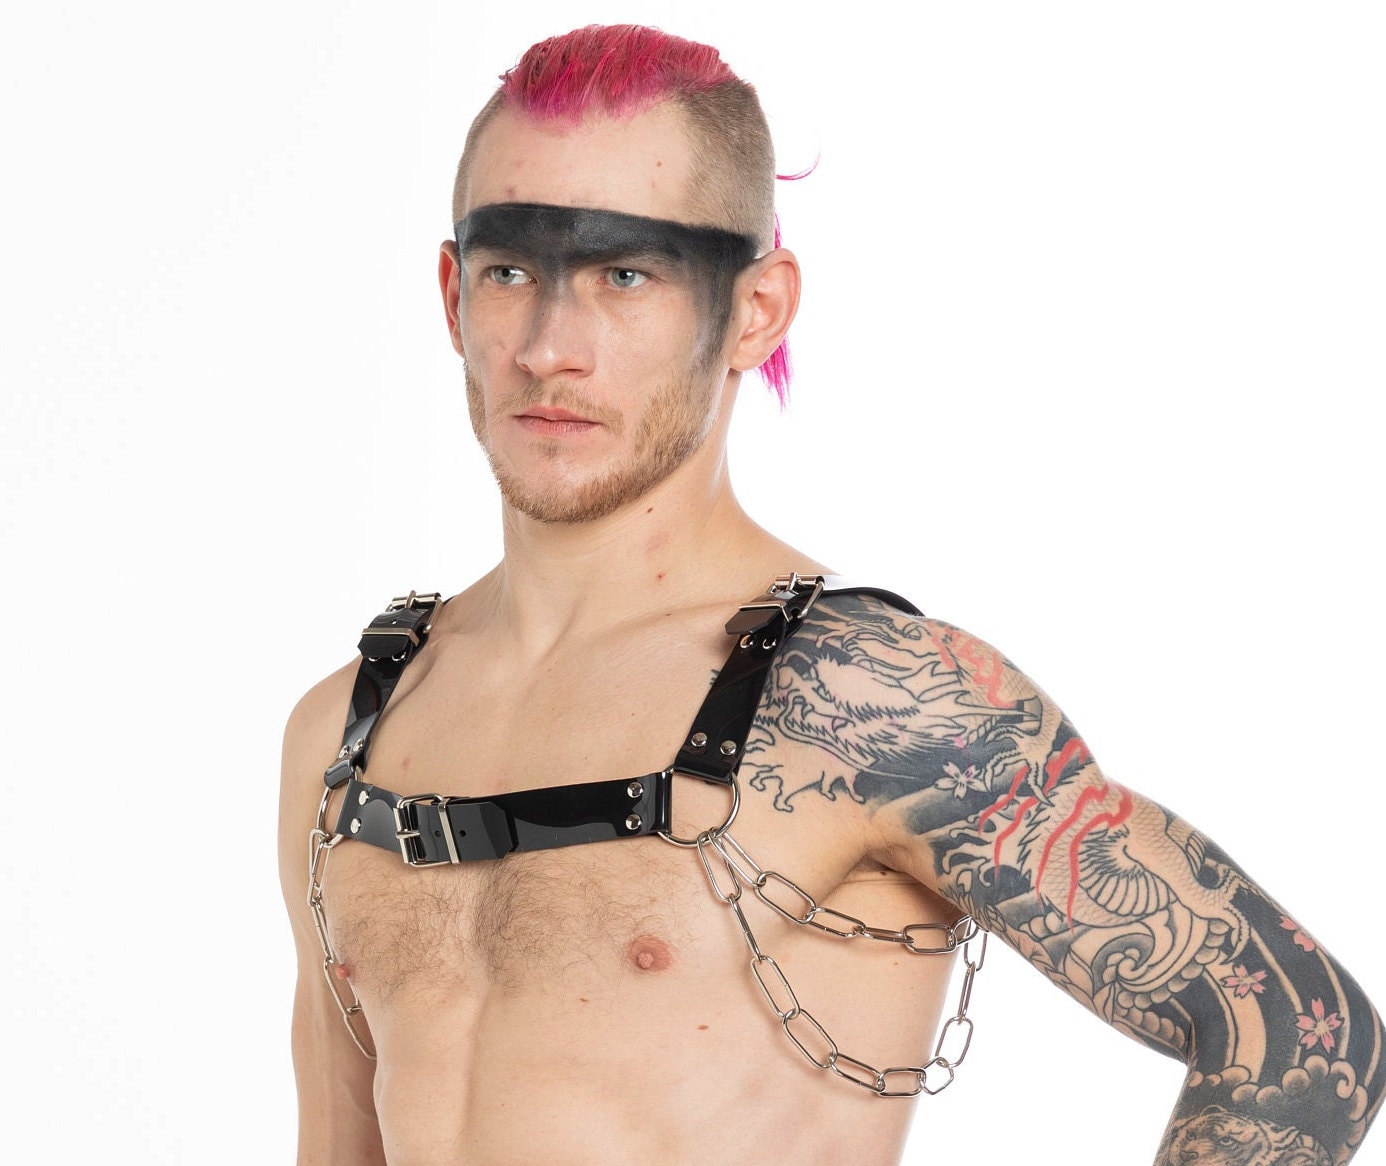 Tattooed Berlin raver with a PVC chest harness side view